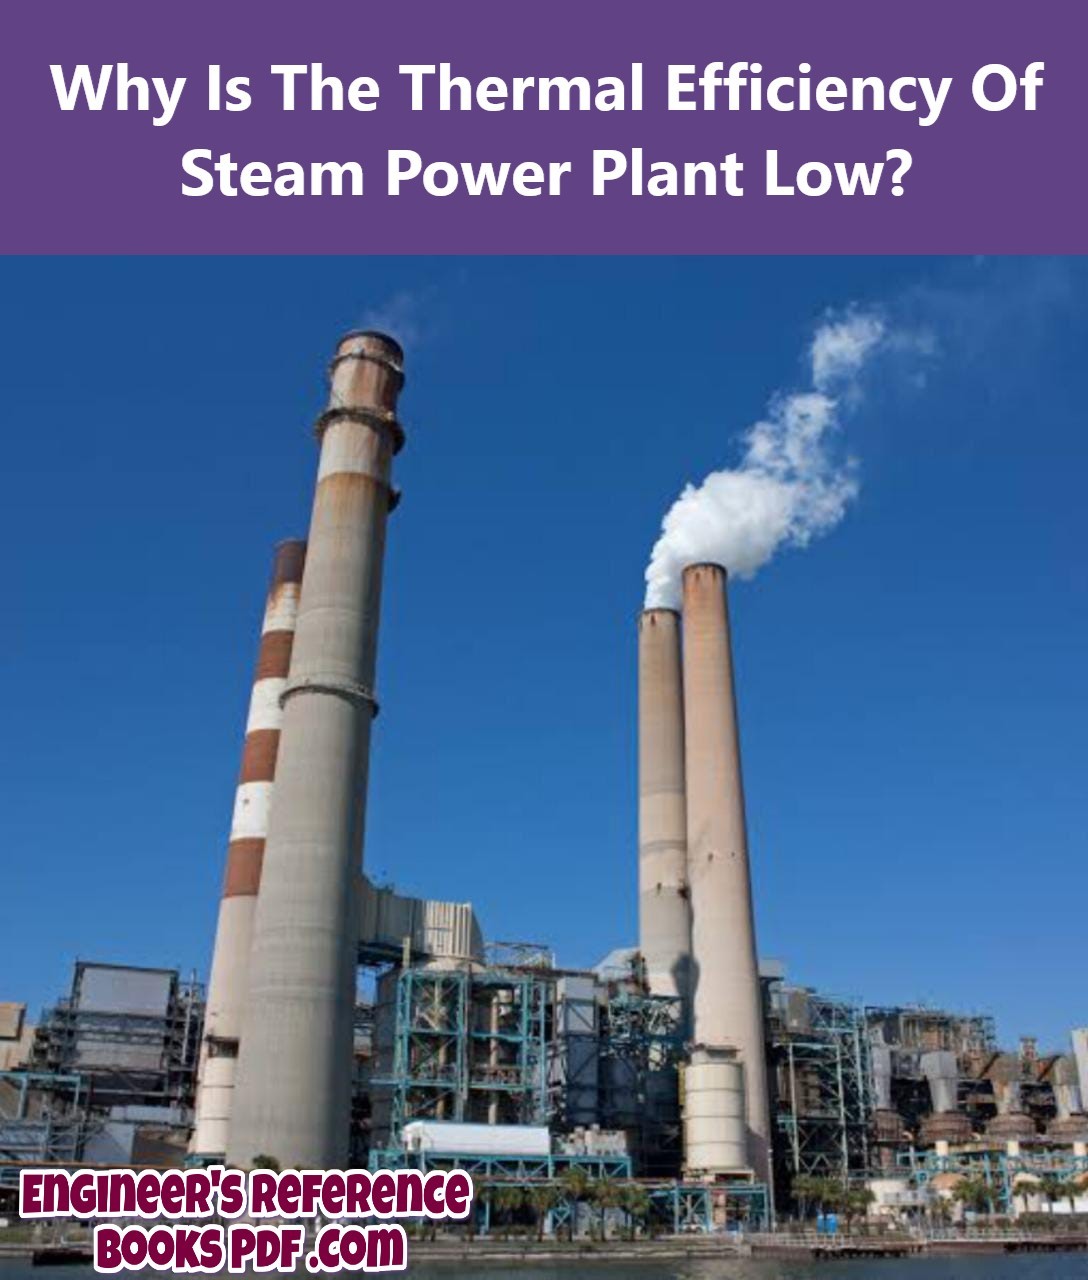 Why Is The Thermal Efficiency Of Steam Power Plant Low?